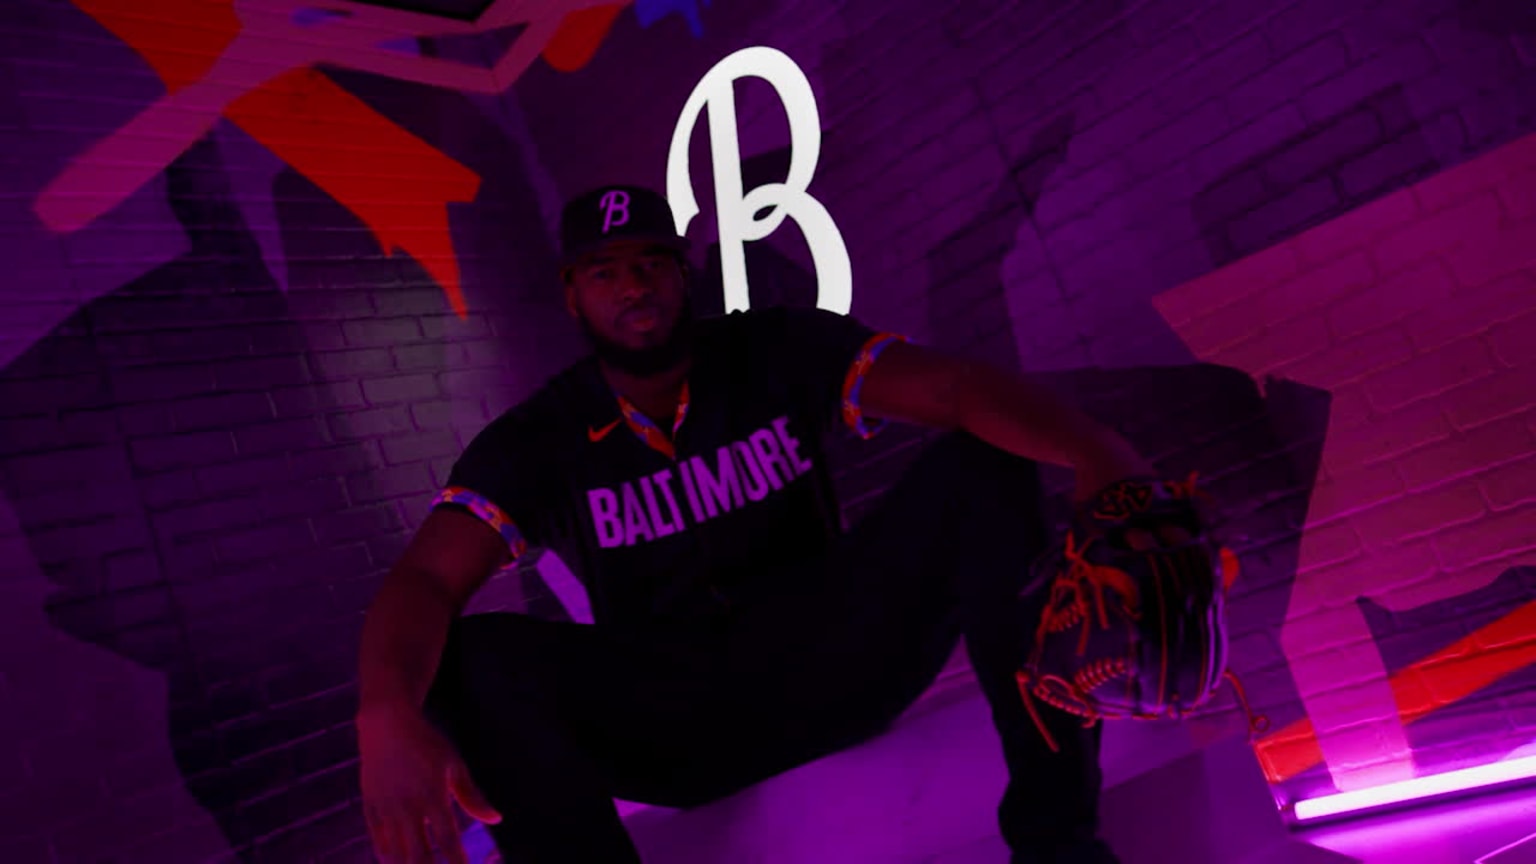 Baltimore Orioles City Connect uniforms were revealed this morning